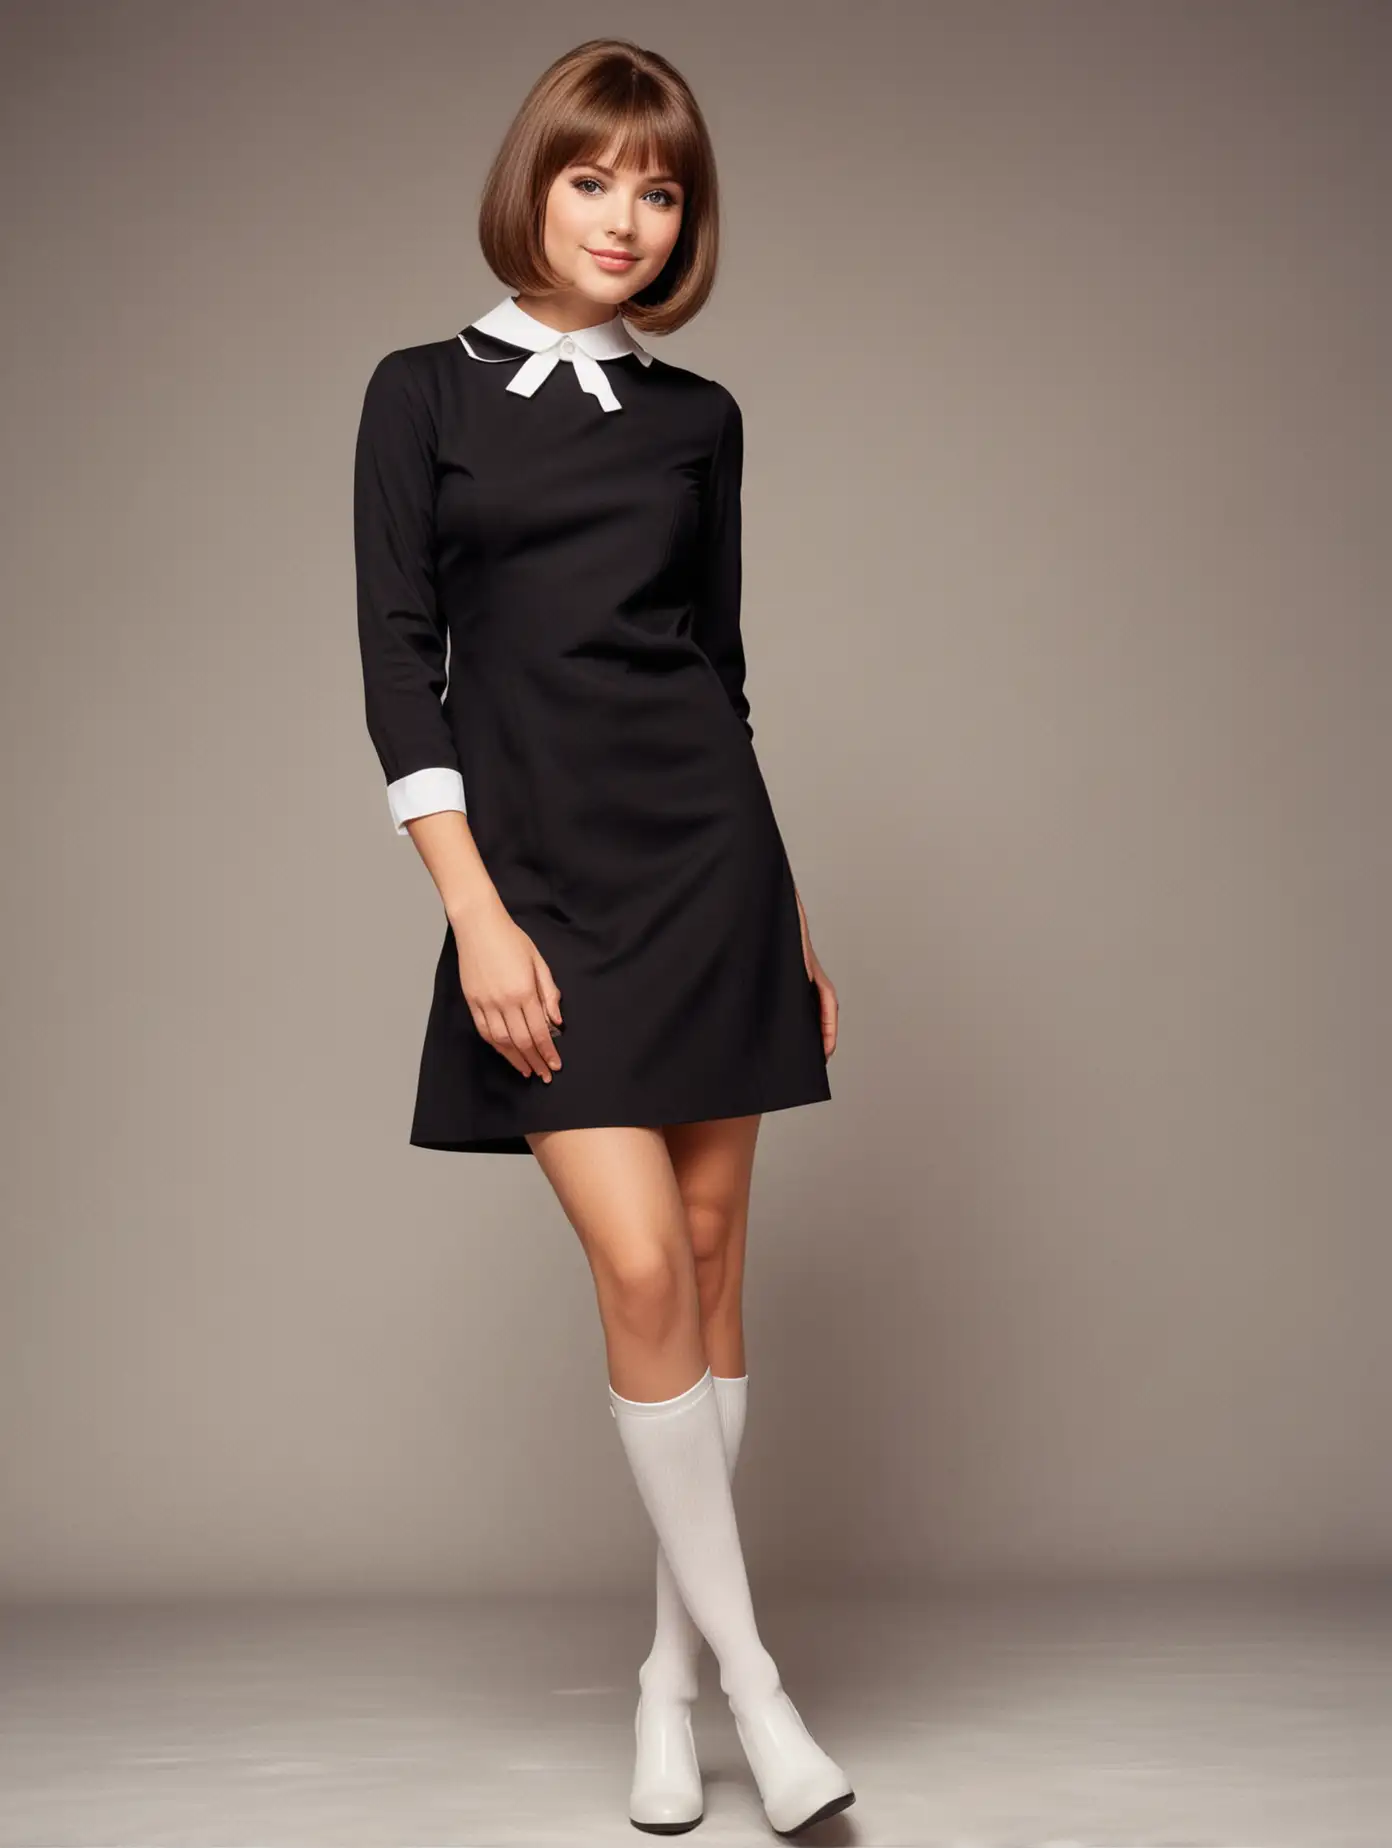 Vintage Portrait of a 1960s Girl in Black ALine Dress and White Gogo Boots